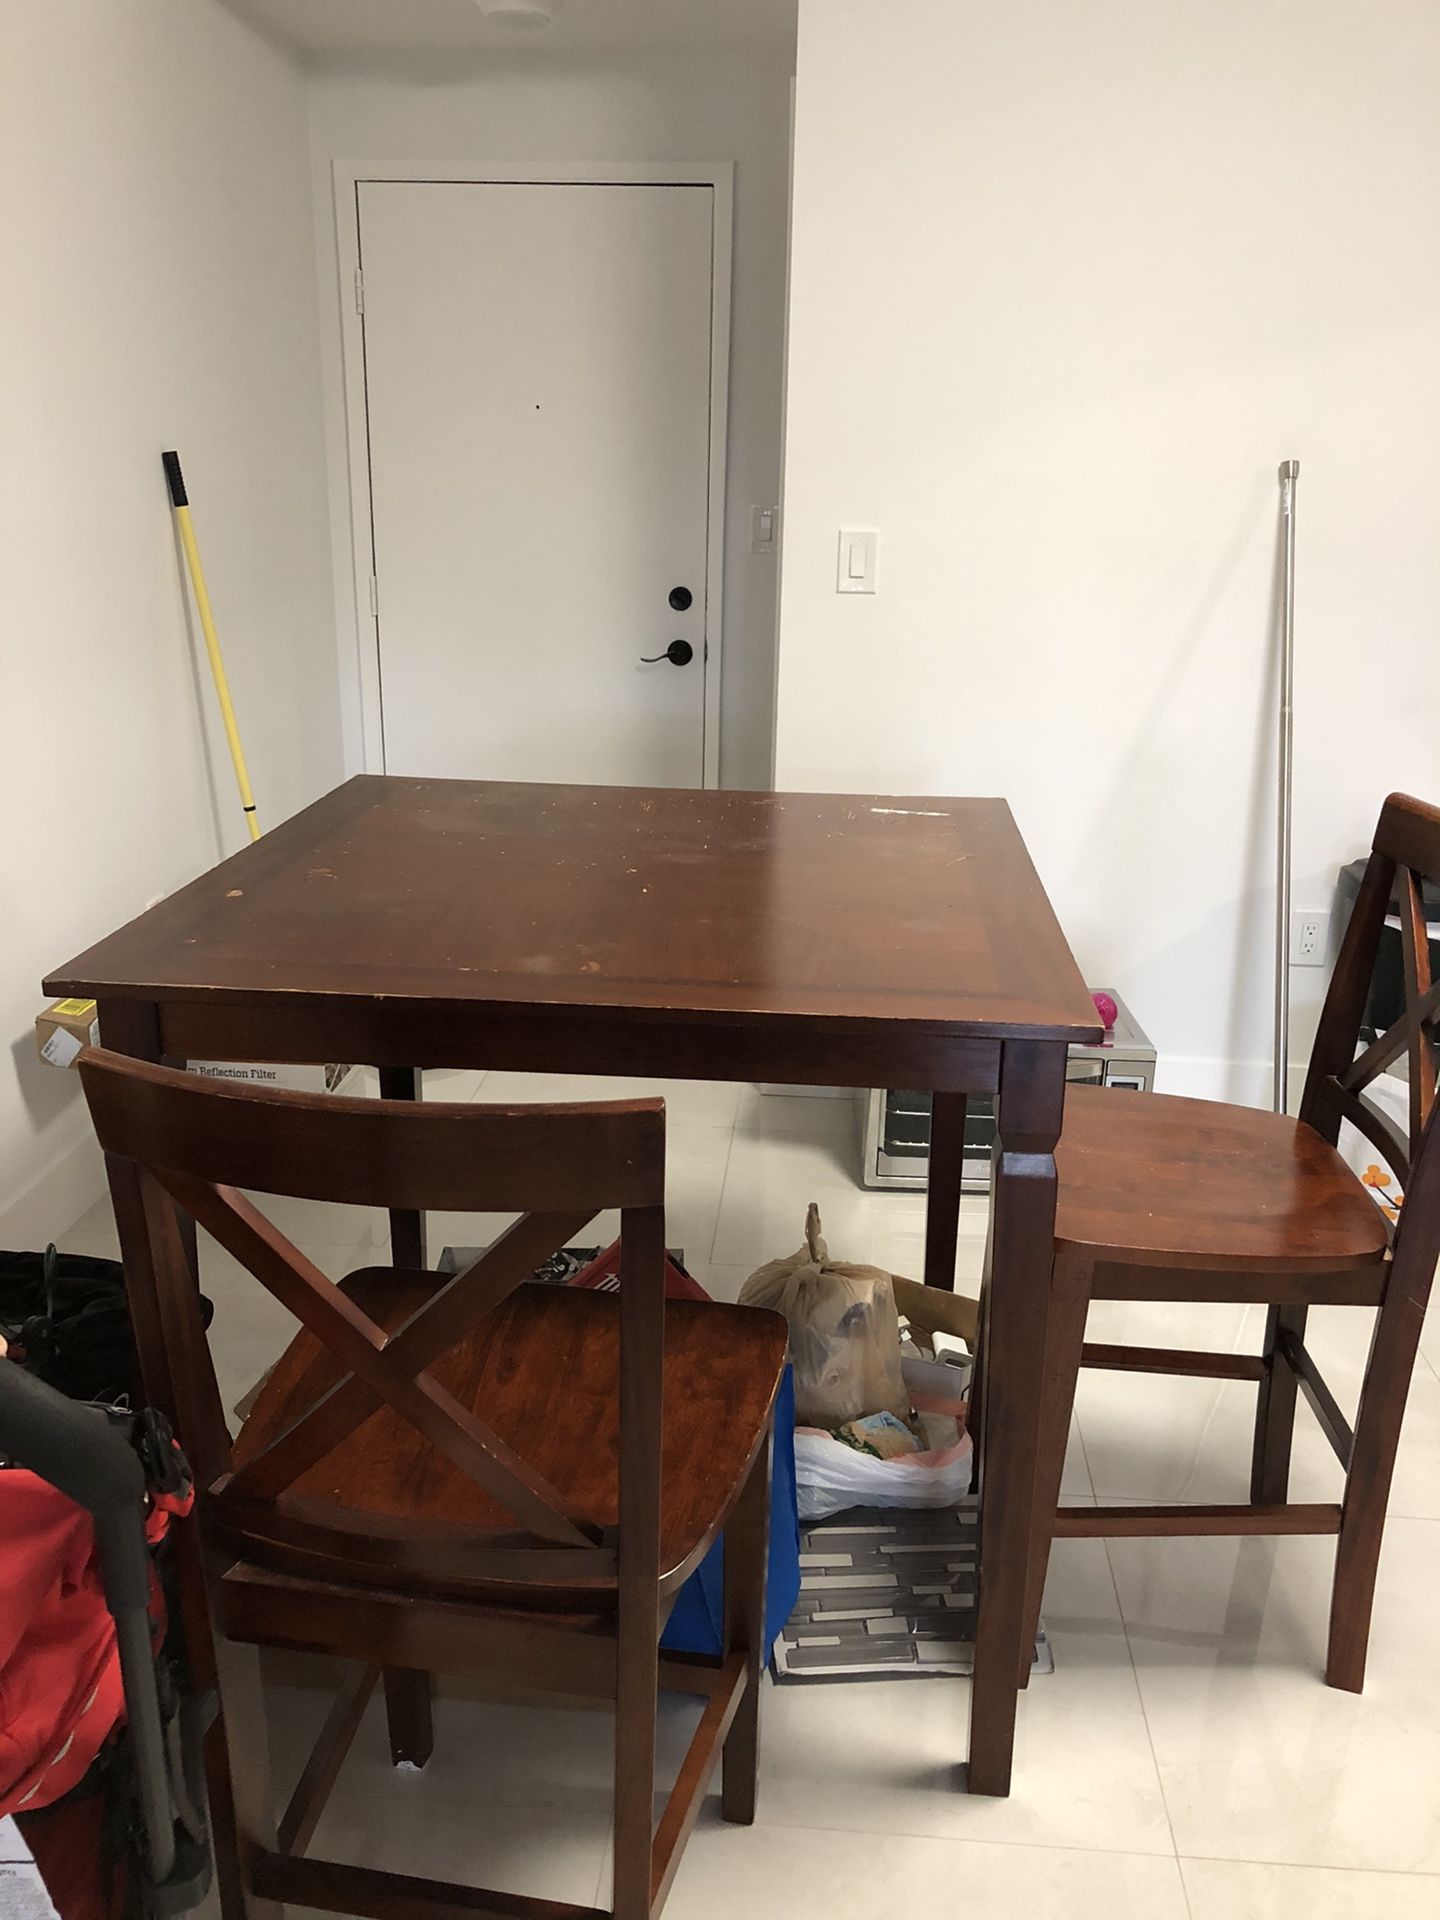 Free table and 4 chairs // Gratis mesa con 4 sillas